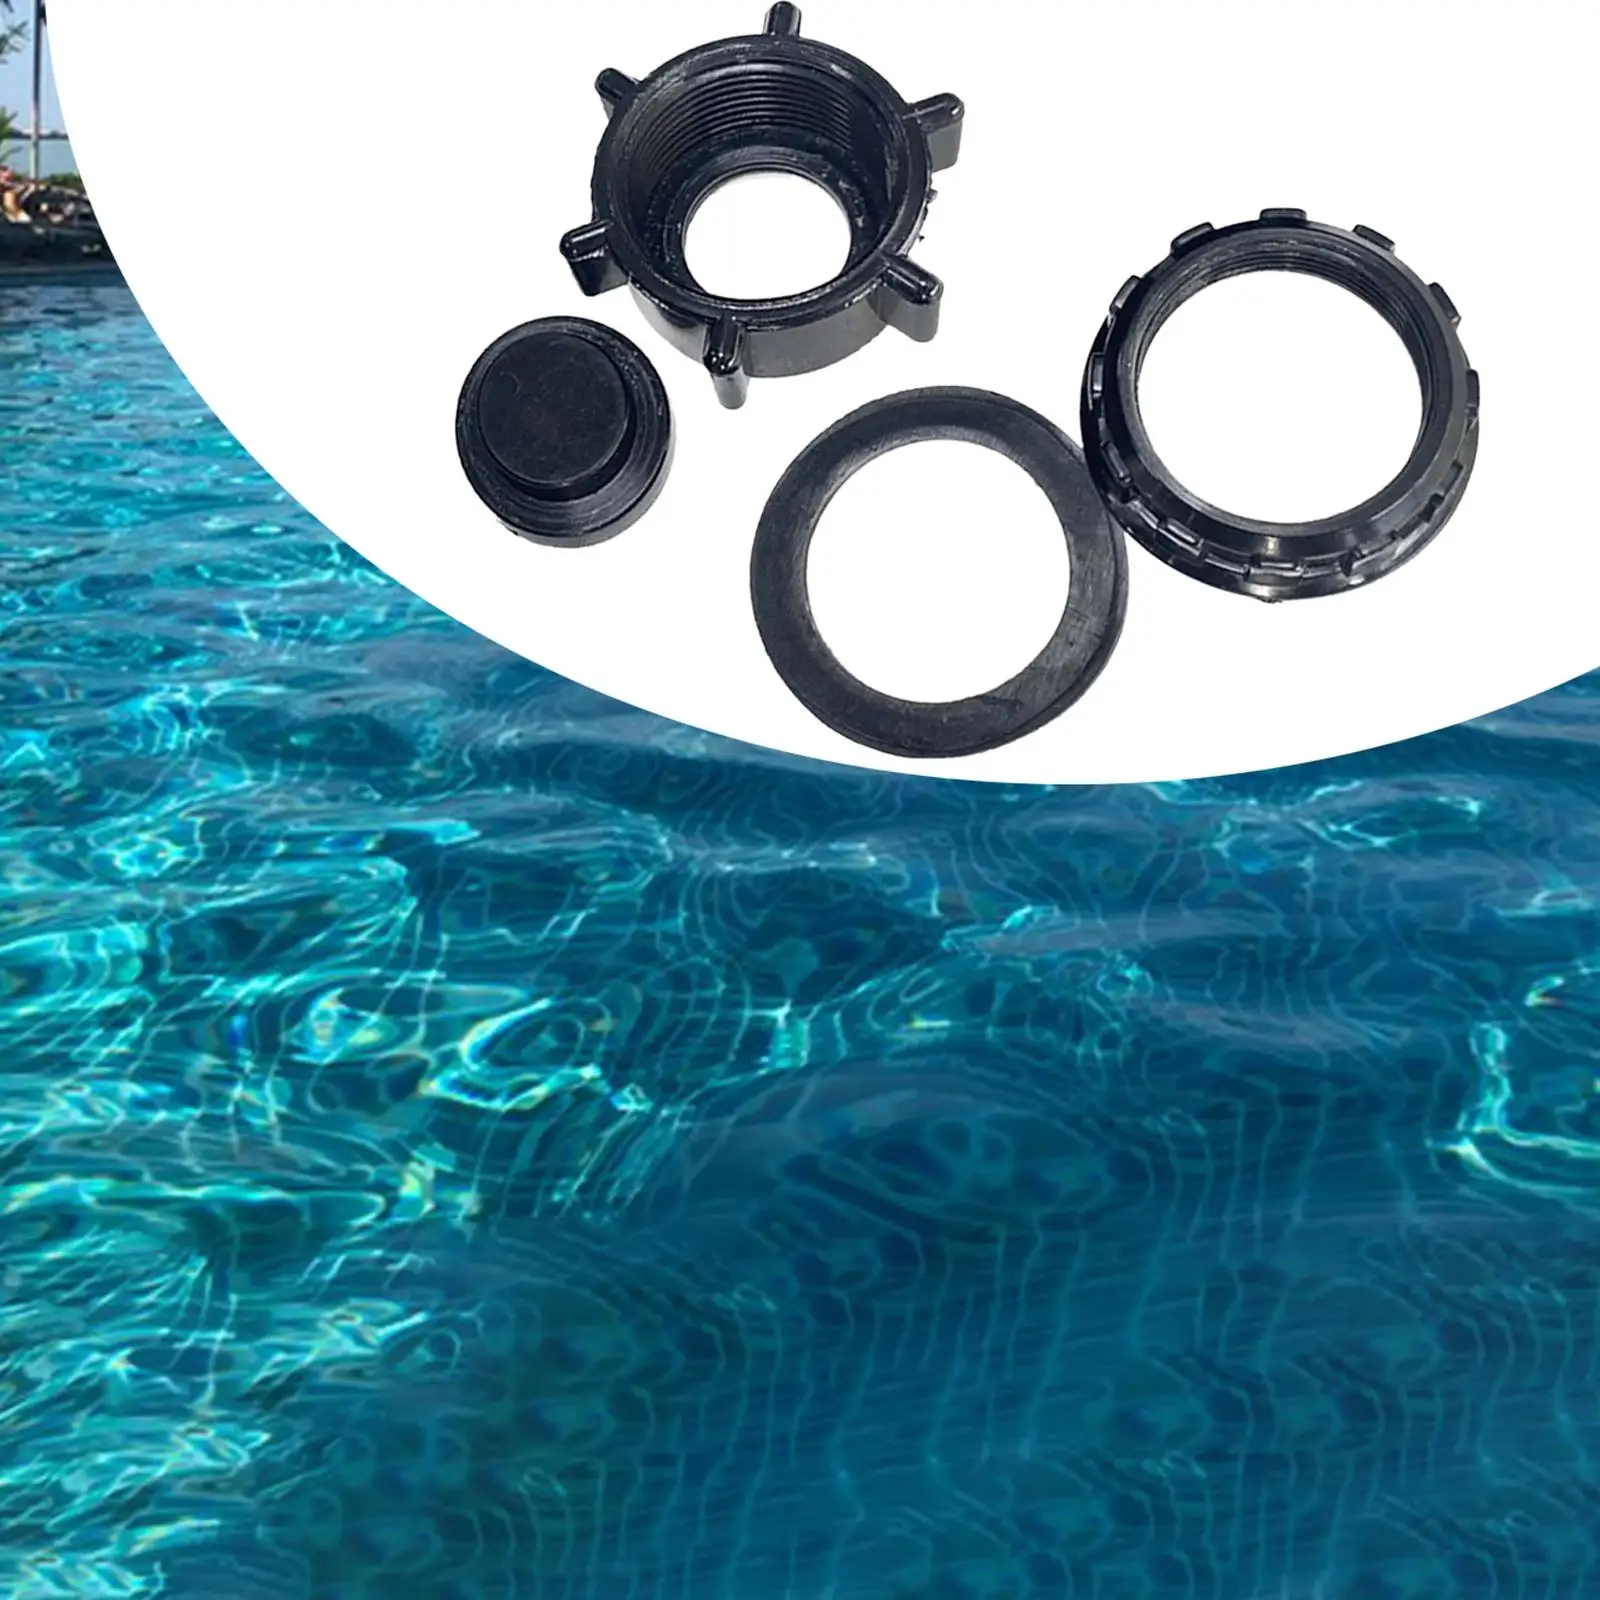 Sand Filter Drain Plug Assembly Fitting Water Drain Set Drain Valve for Swimming Pool Sand Tank Sand Filter Pumps Accessories